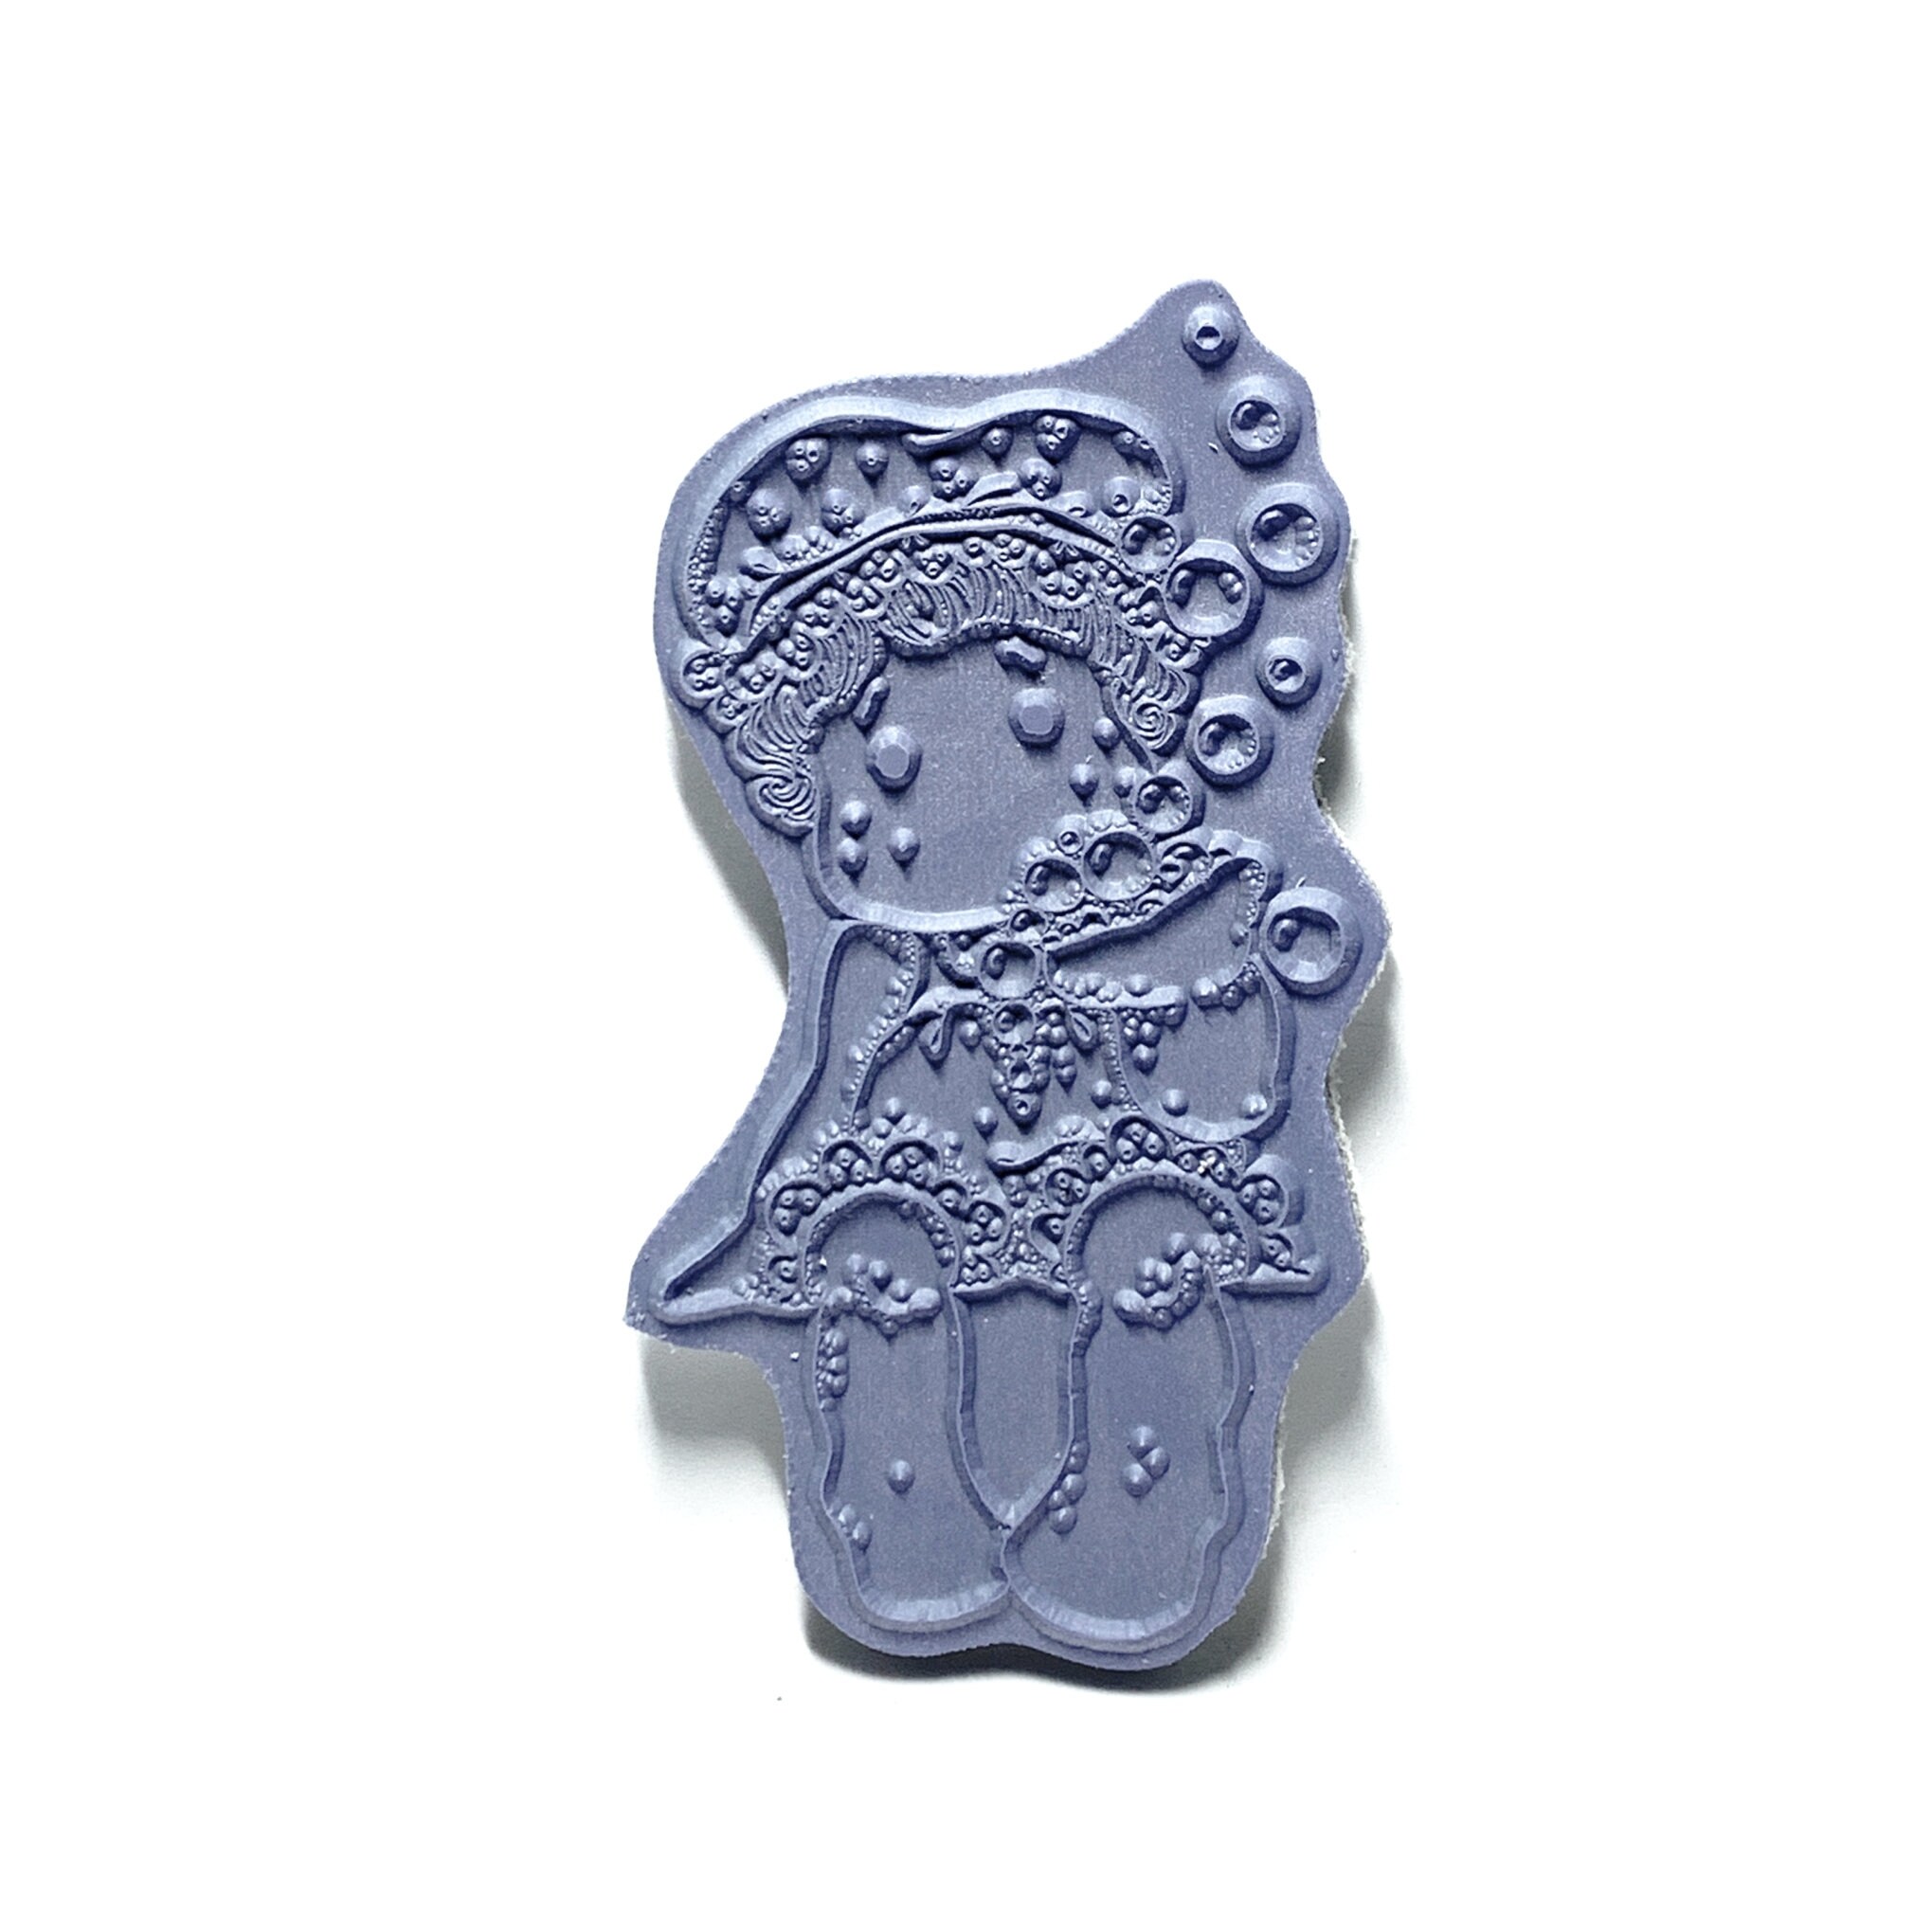 Bubbles Cling Rubber Stamp Sitting Girl Tilda with Bathcap | Etsy